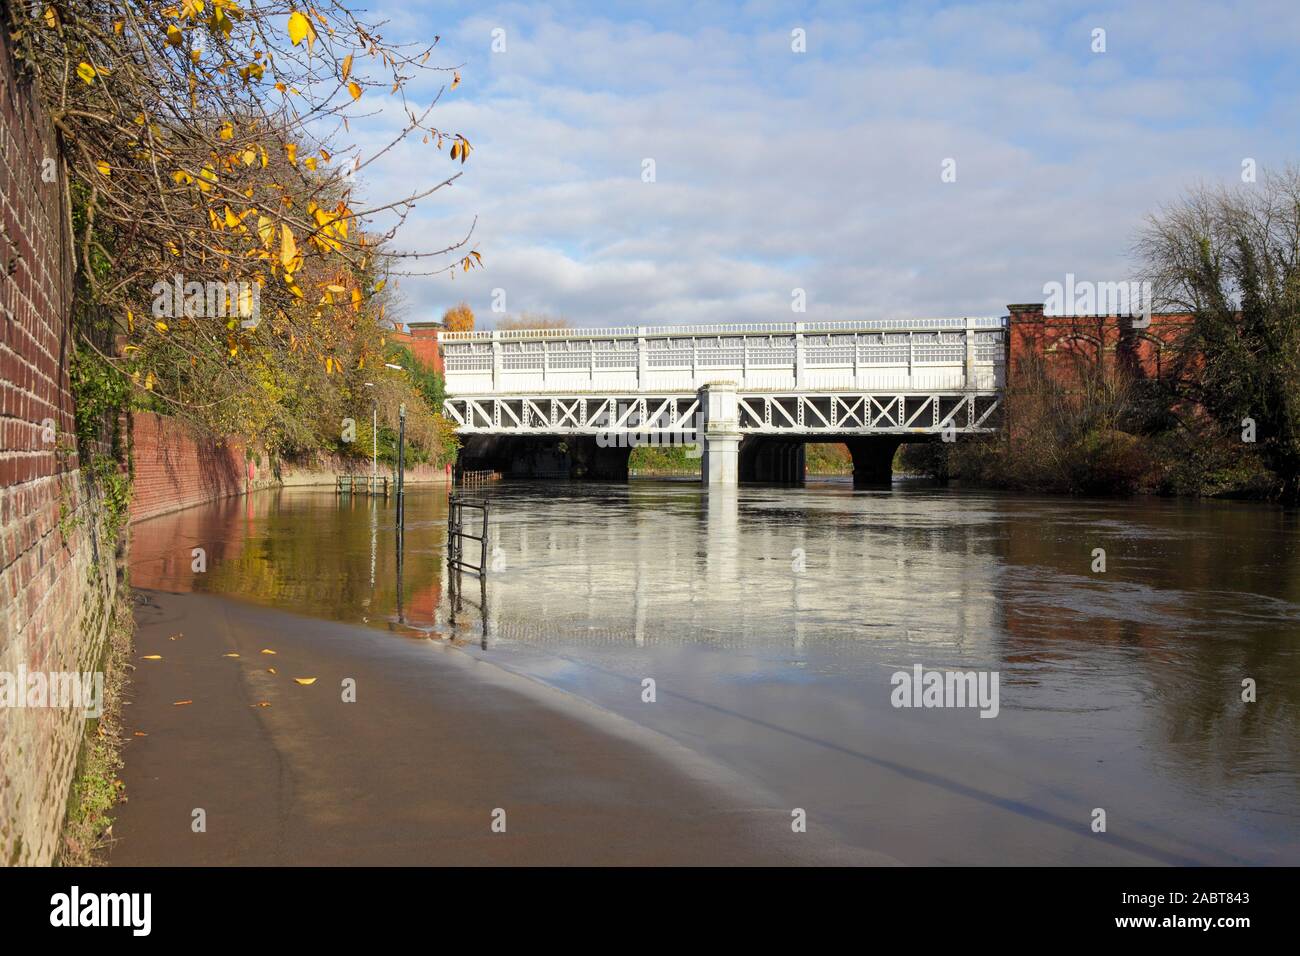 The Railway Bridge over the River Severn in Shrewsbury over what is a very swollen river indeed. The footpath is viewed here flooded. Stock Photo